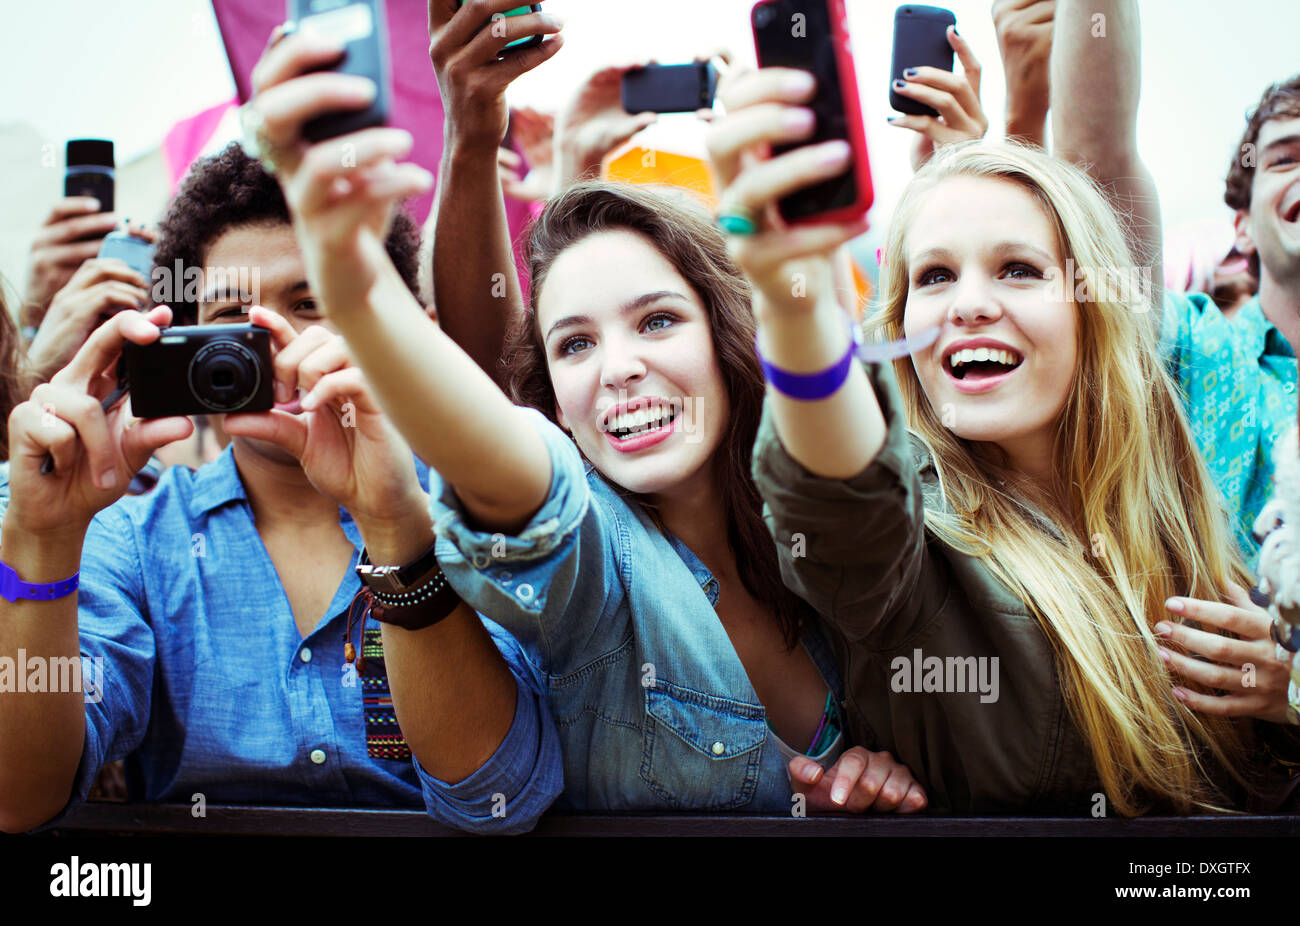 Fans with cameras and camera phones at music festival Stock Photo